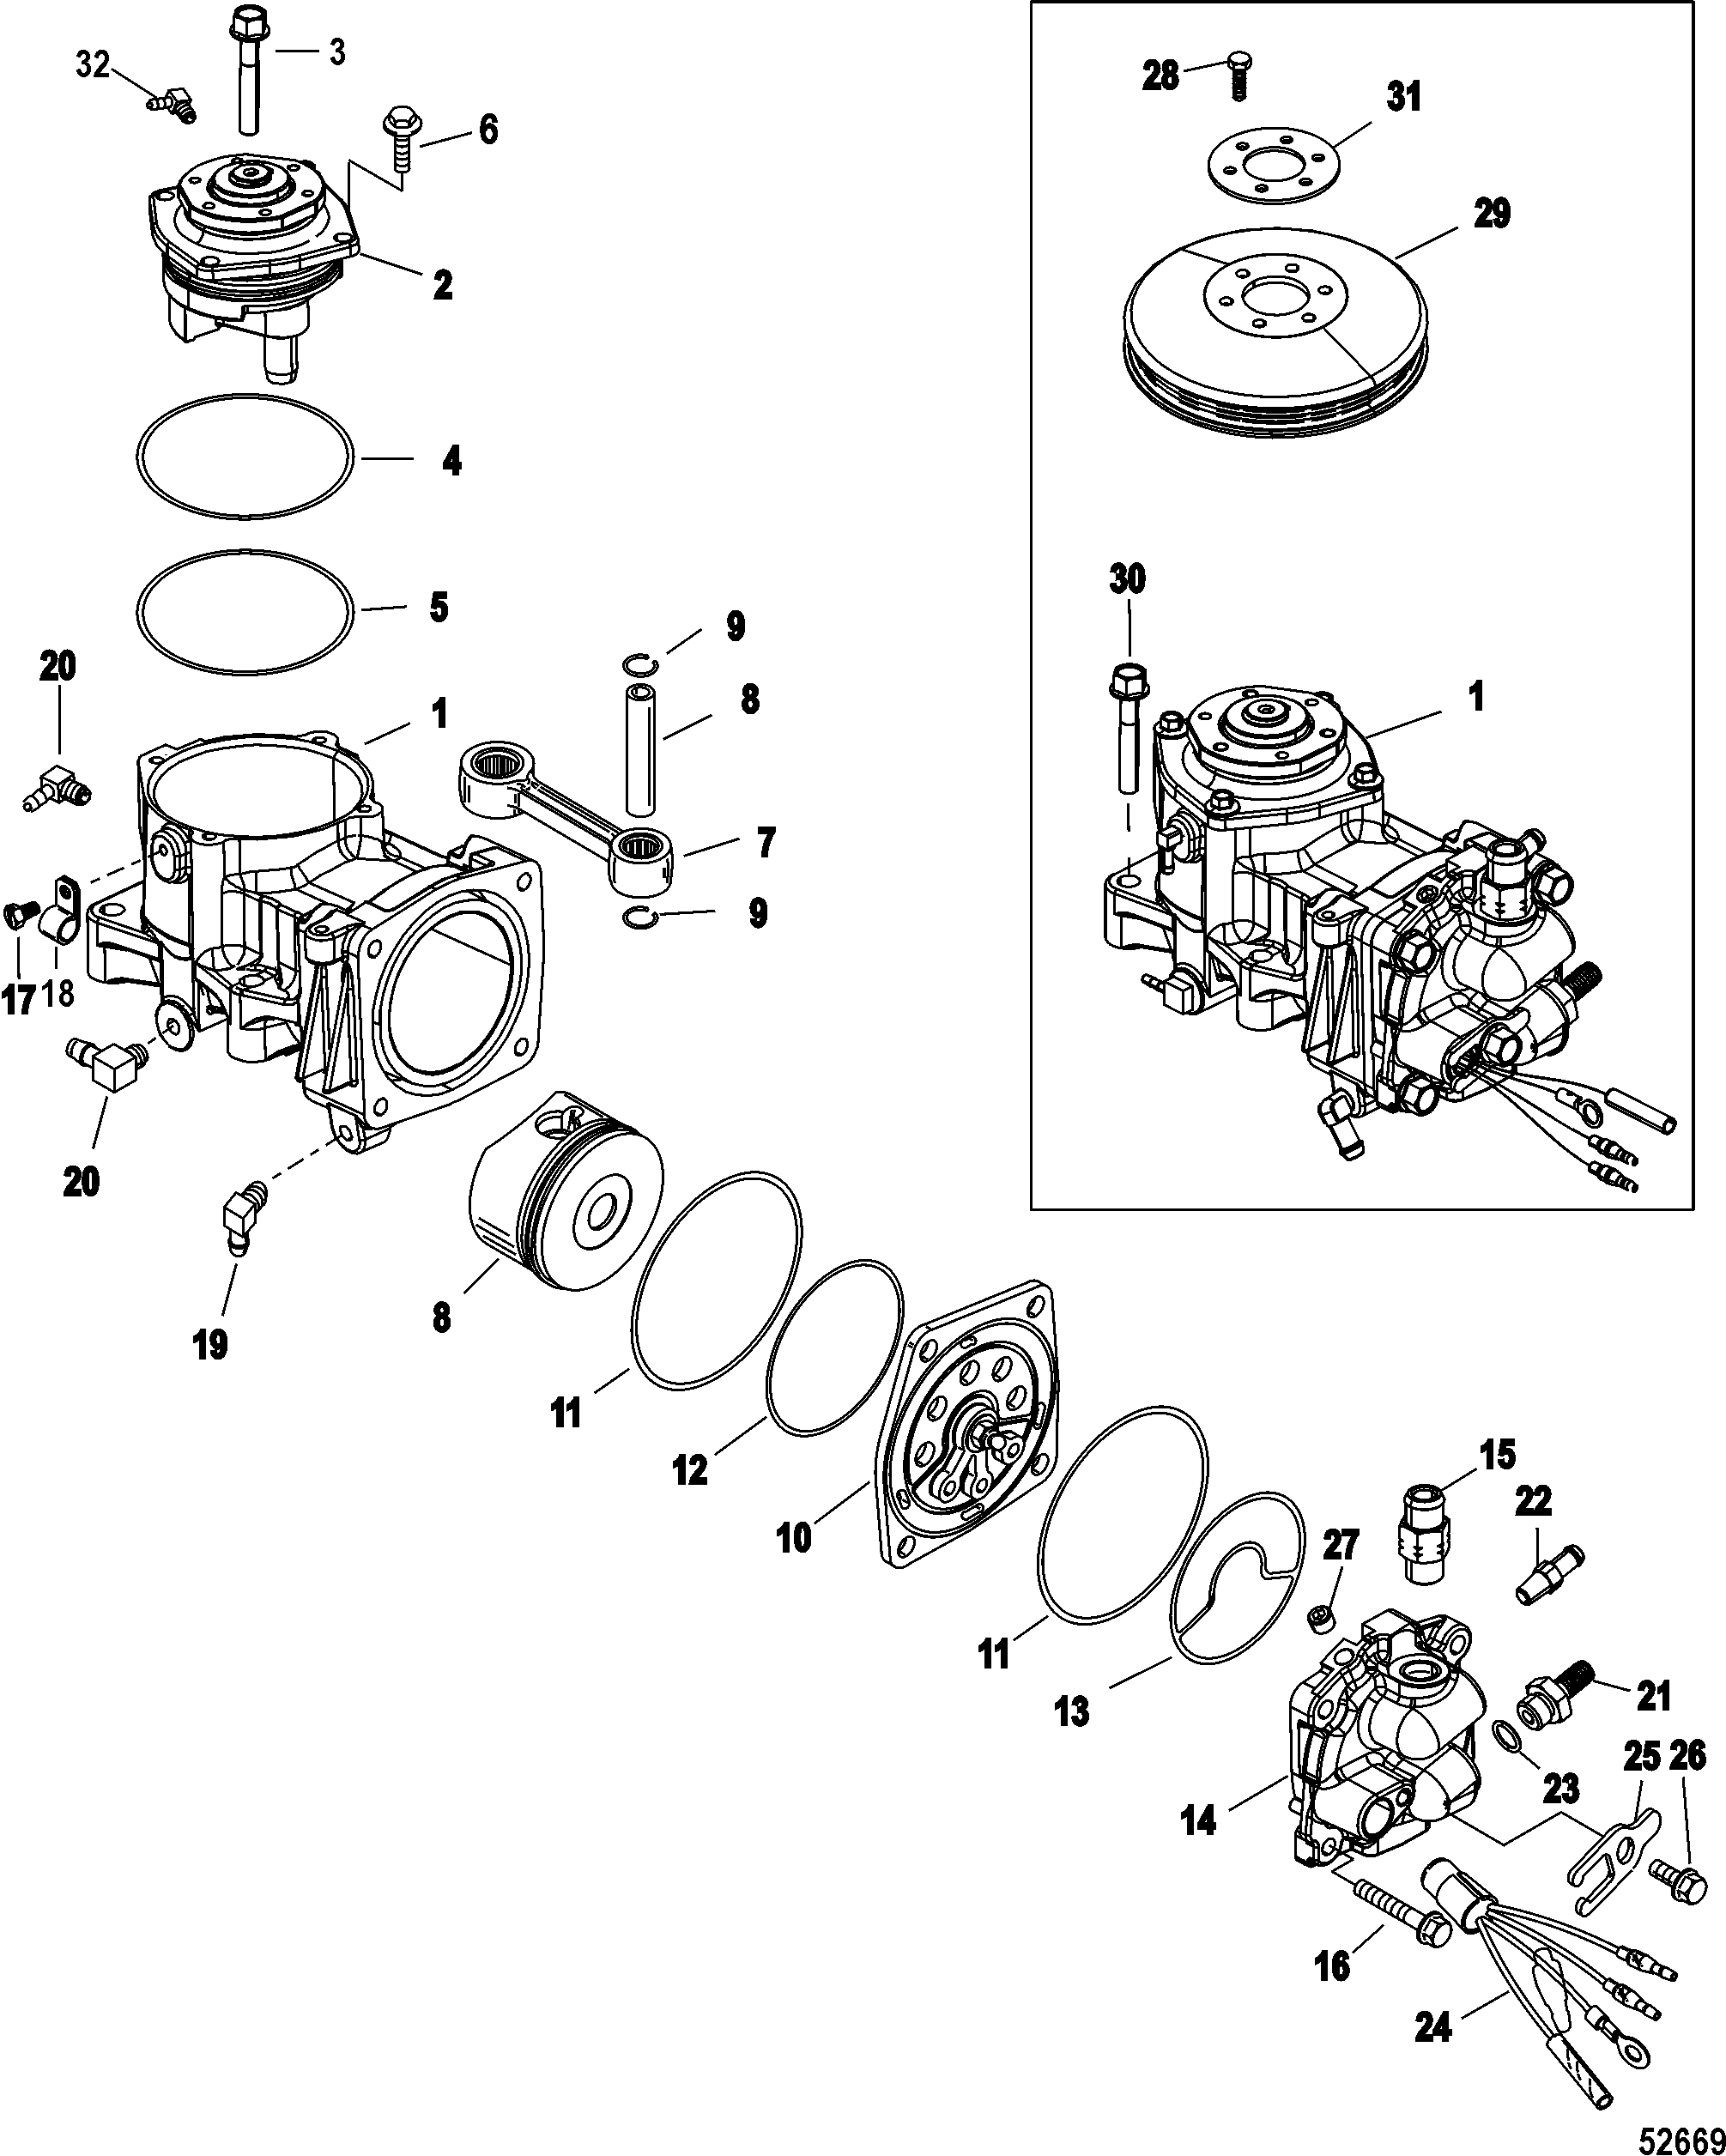 Air Compressor Components, SN# 1B885132 and above